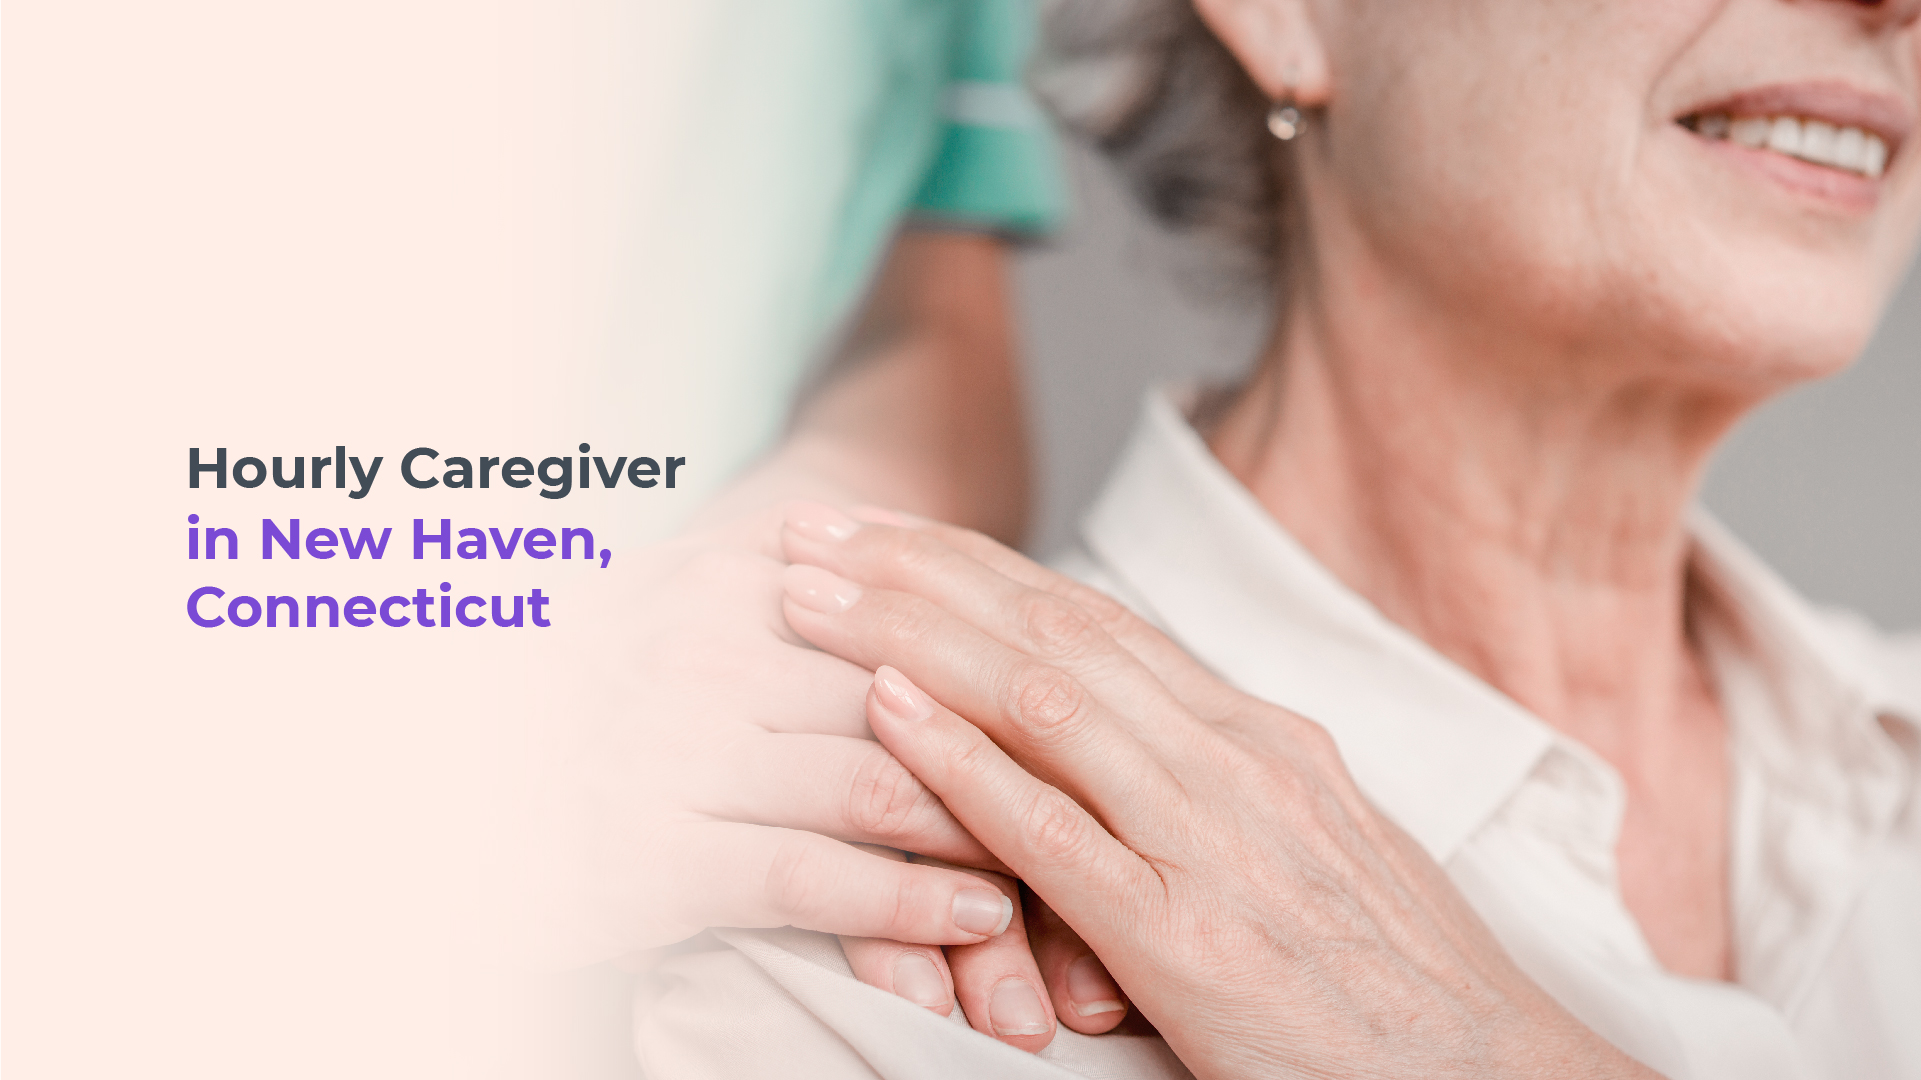 Hourly Caregivers in New Haven Connecticut